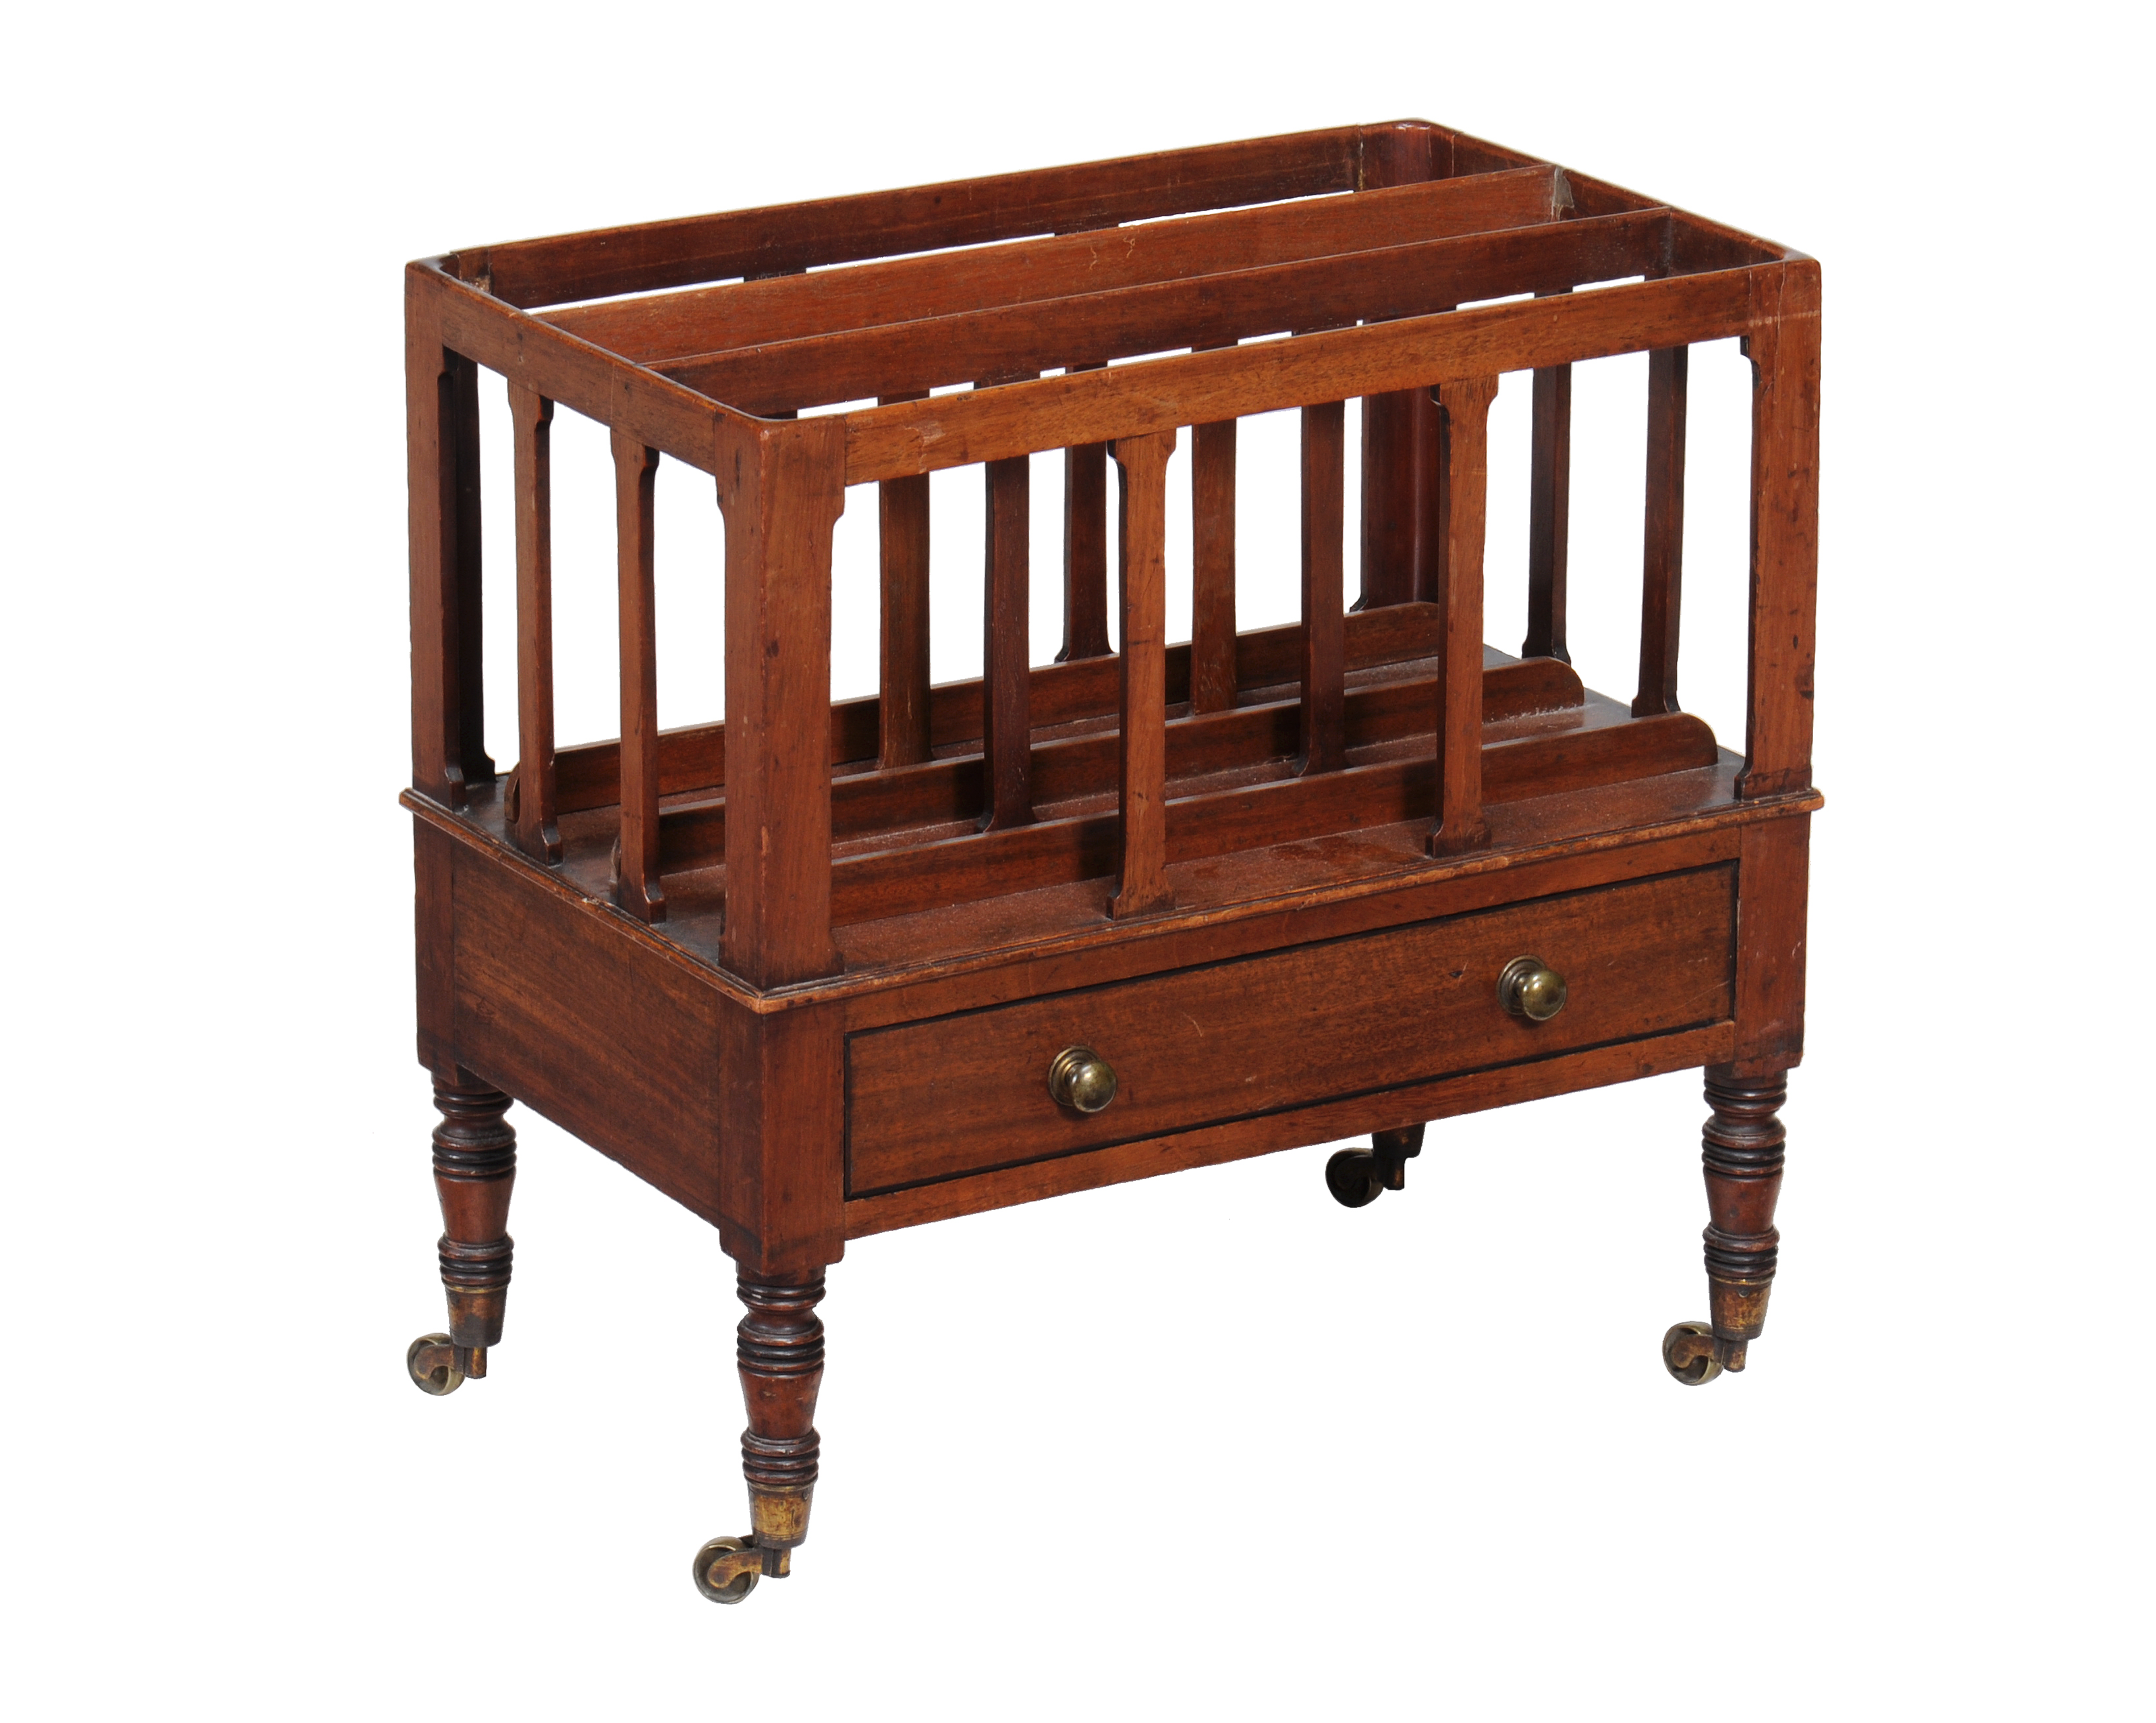 A Regency mahogany Canterbury, circa 1820, with ebony stringing, fitted a drawer and flat spindle